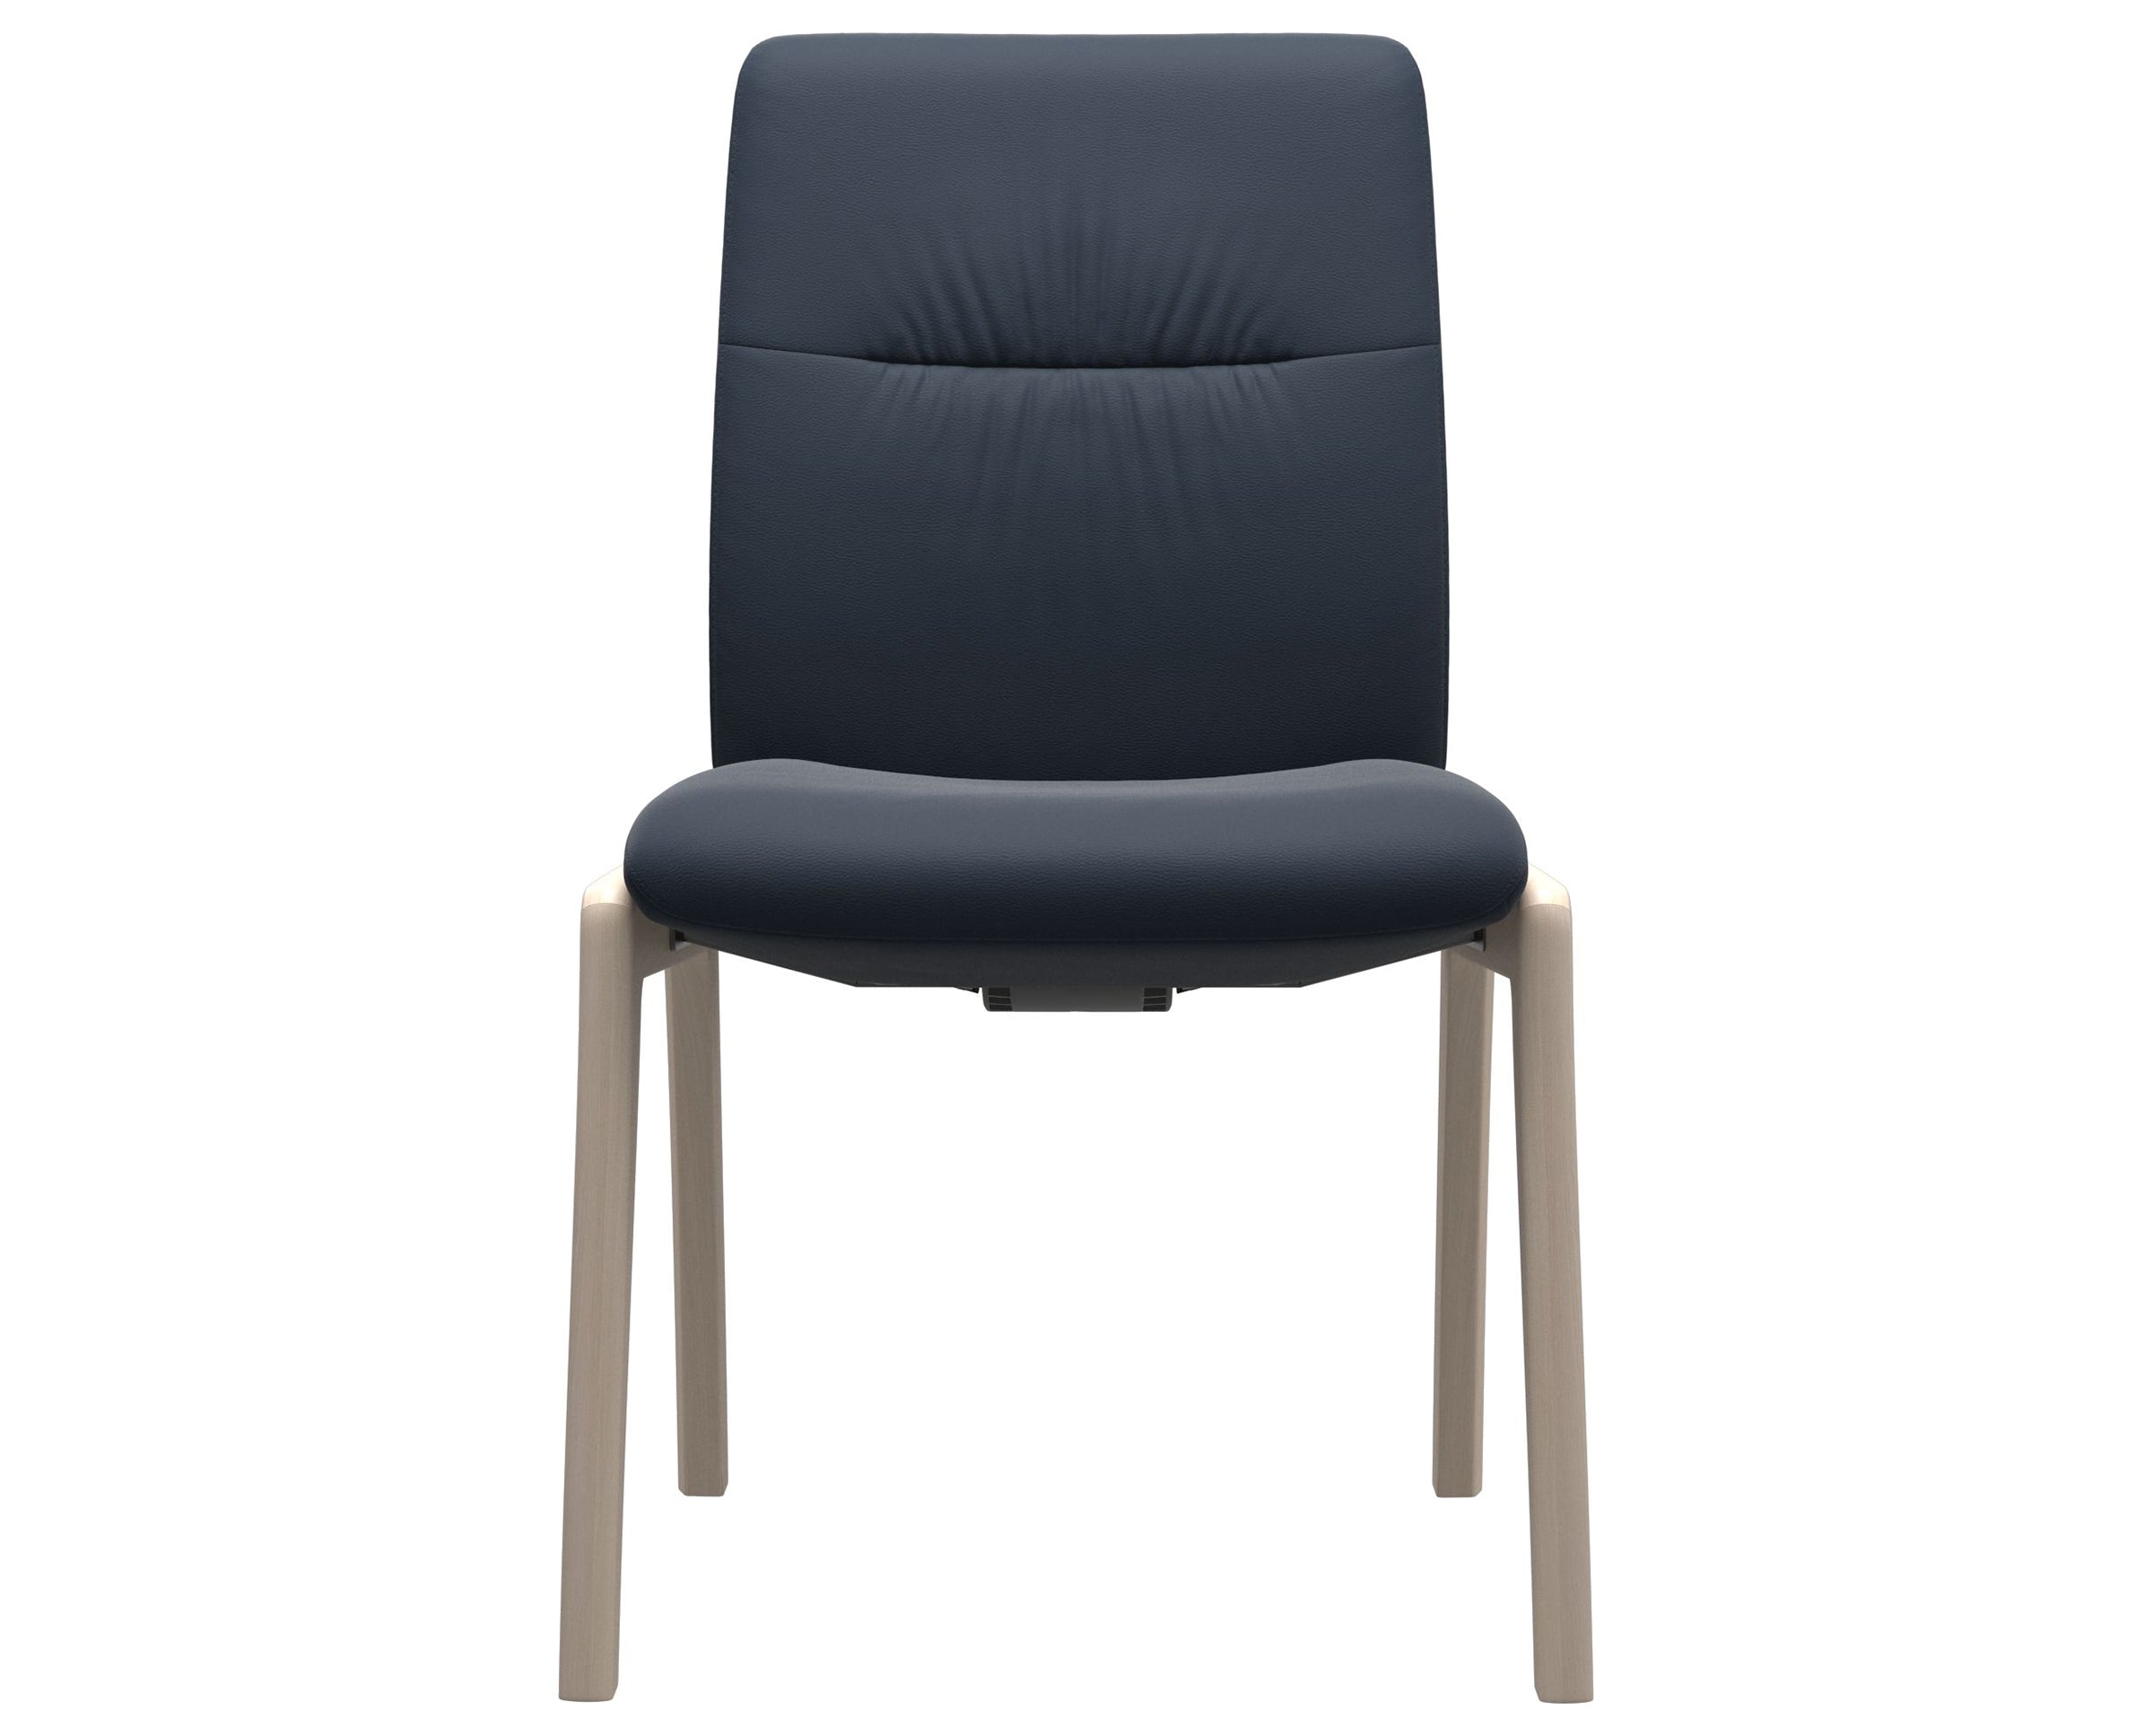 Paloma Leather Oxford Blue and Whitewash Base | Stressless Mint Low Back D100 Dining Chair | Valley Ridge Furniture